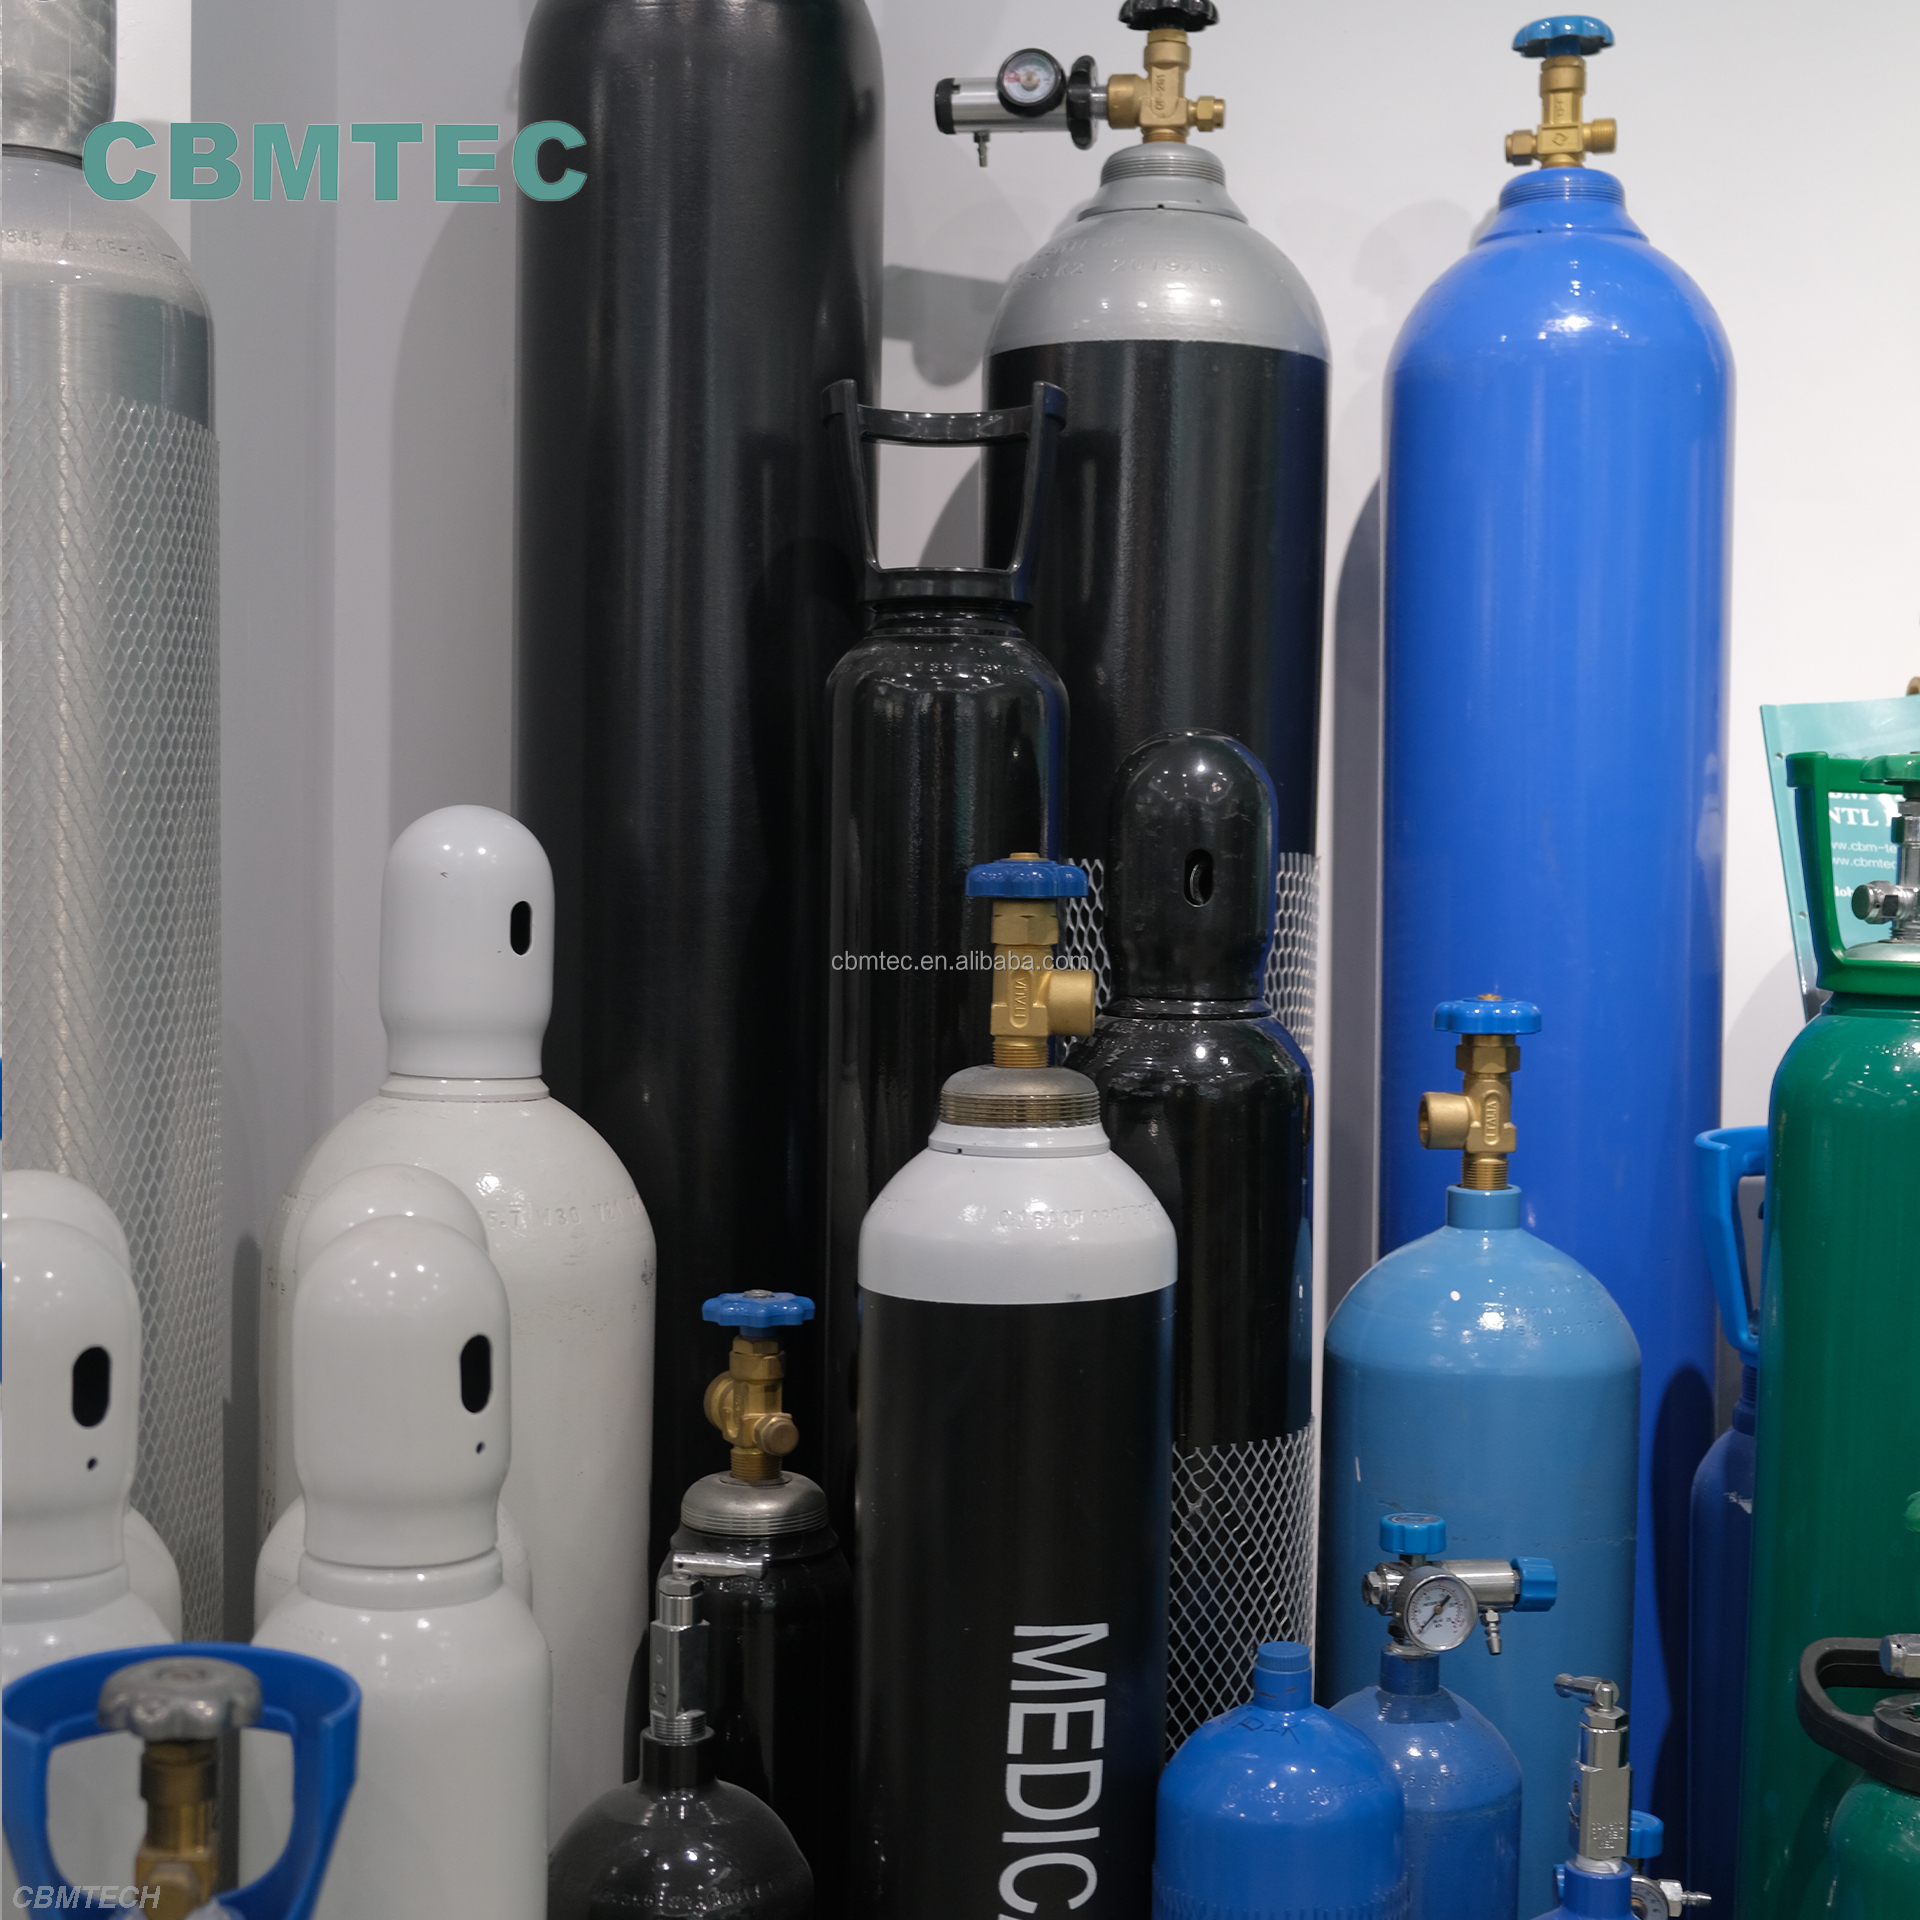 47L Oxygen Cylinders